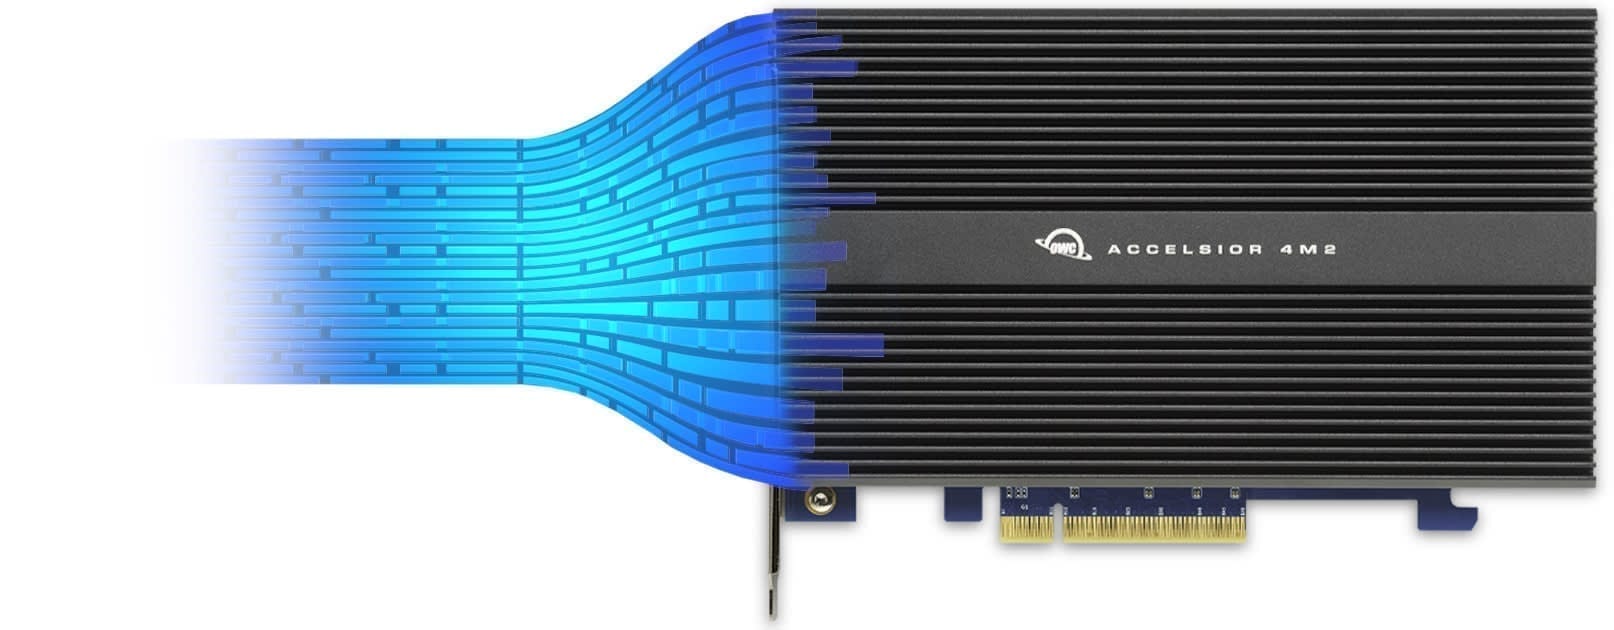 OWC Accelsior 4M2 SSD showing fast lanes of traffic